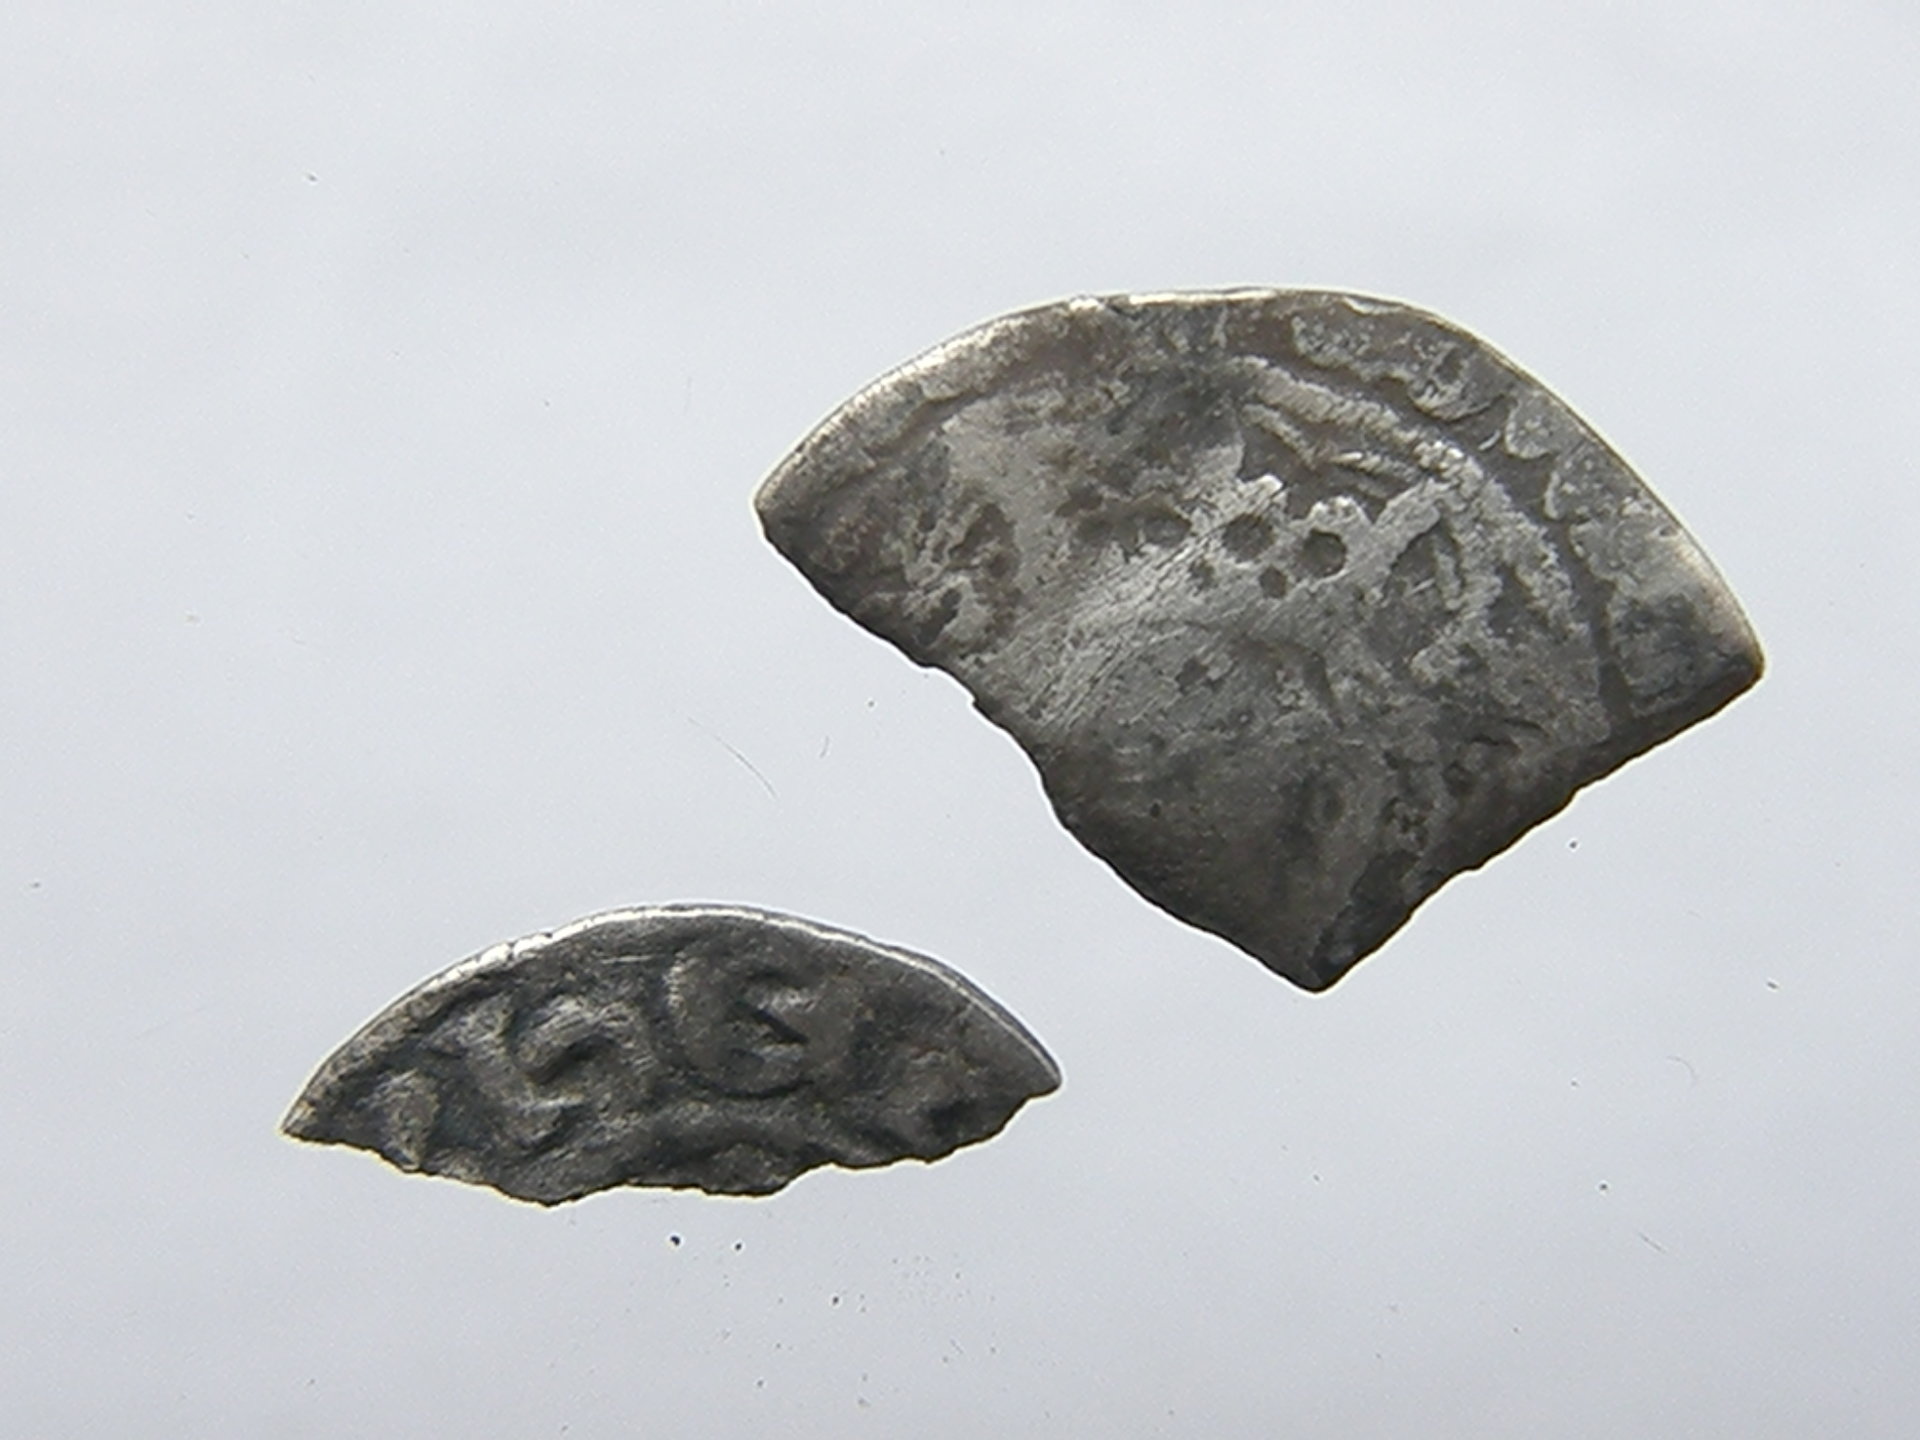 obverse of groat and penny.JPG